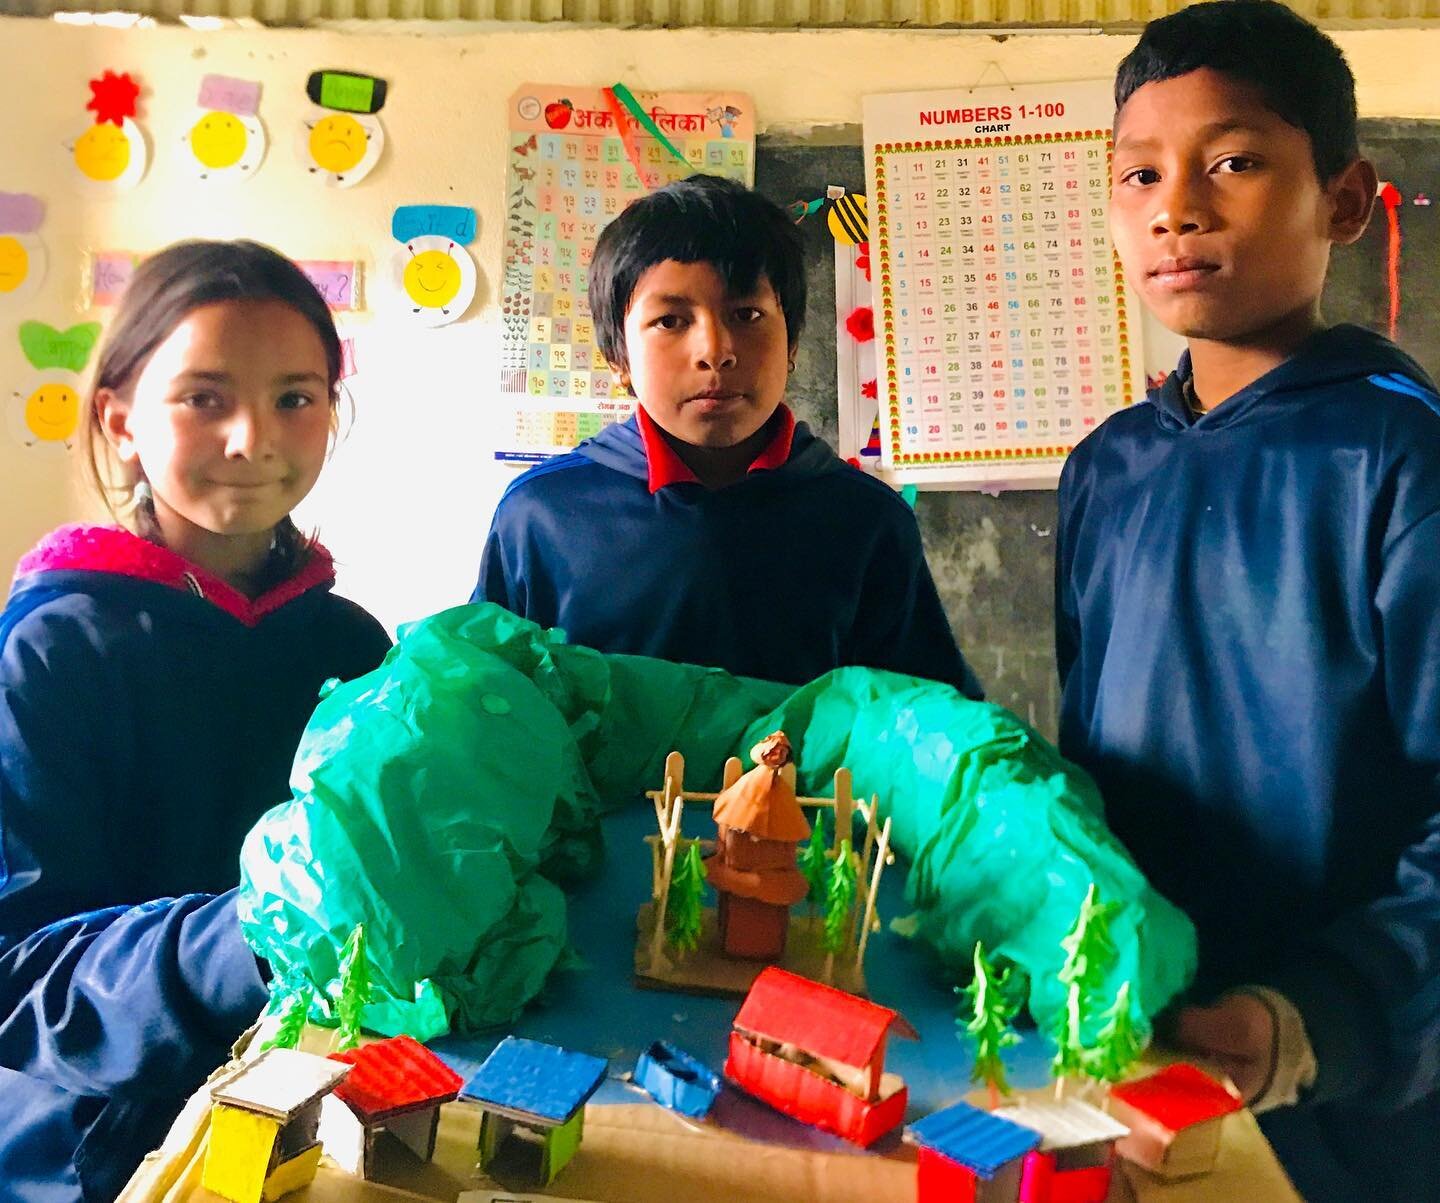 Students recreated Fewa Lake &amp; Tal Barahi Temple 🇳🇵National landmarks of Nepal! 

Fewa Lake holds a special place in the hearts of Nepali people. 🌊✨ It is significant on many levels: spiritually, as many Hindu temples surround the lake, making